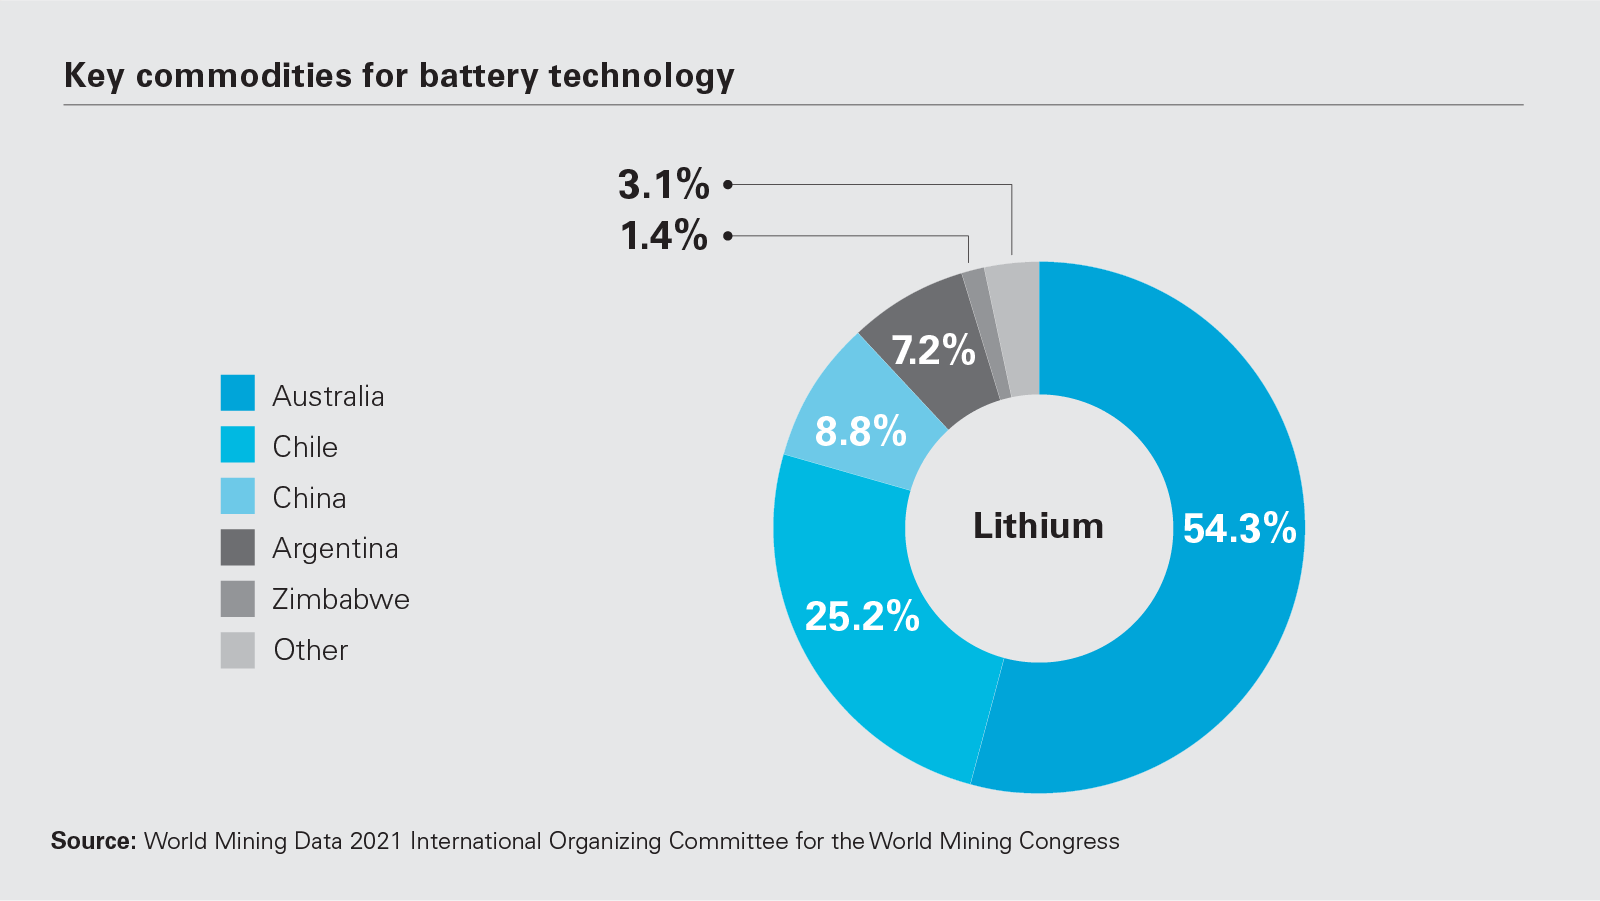 Key commodities for battery technology